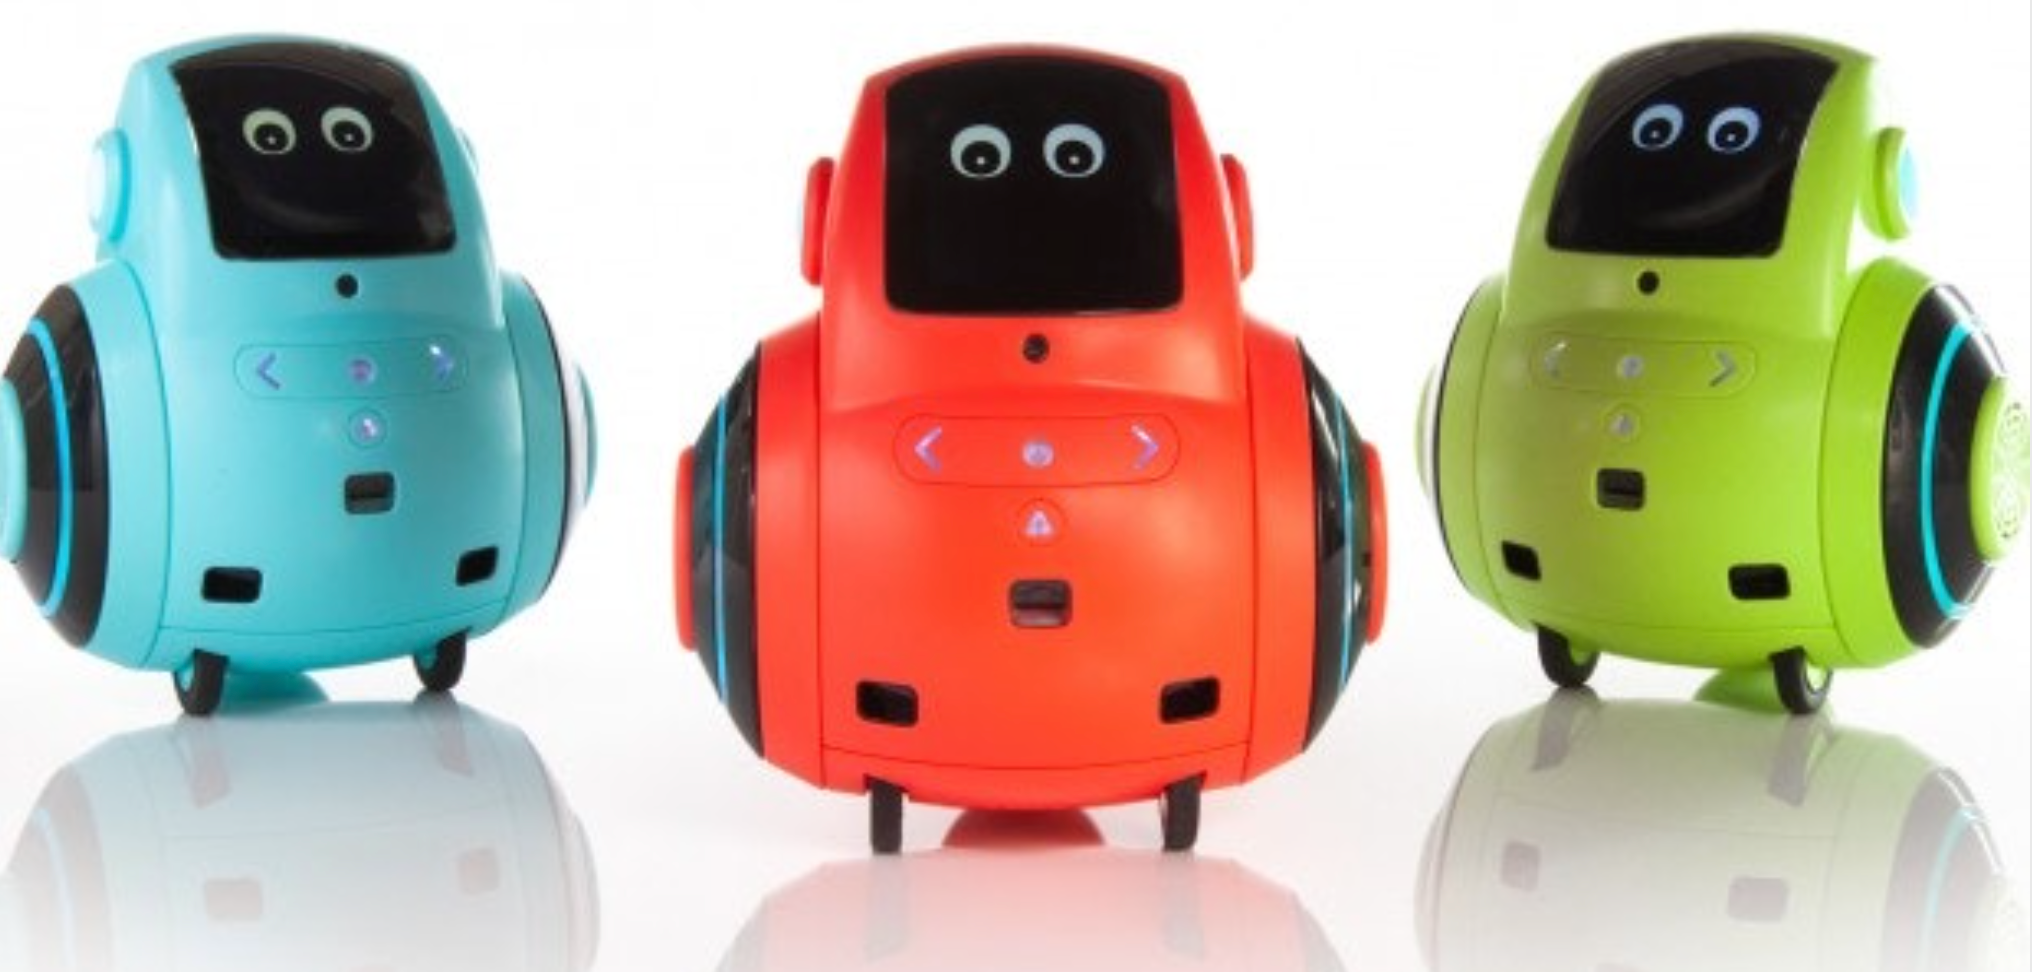 Miko 2 AI robot for kids now offers Hindi mode - The Daily Guardian